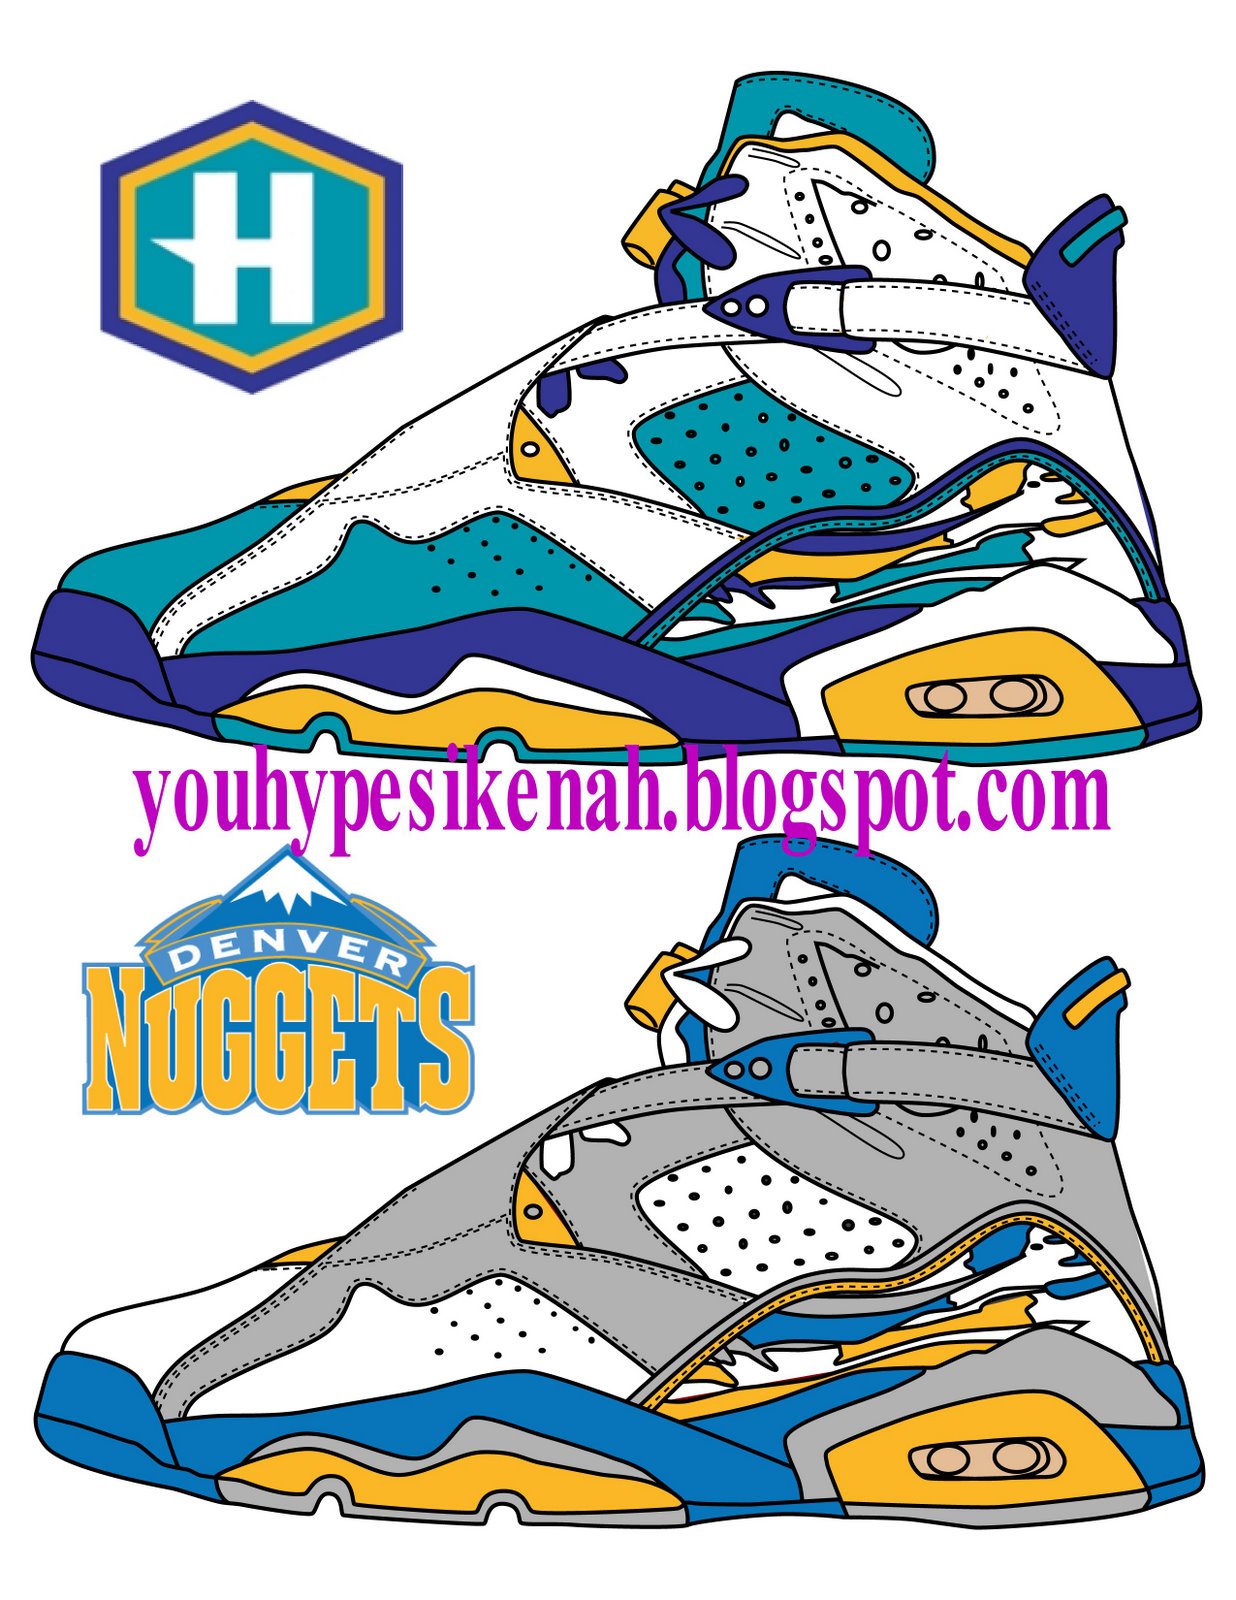 [Hornets+and+Nuggets+Vol.+1.jpg]